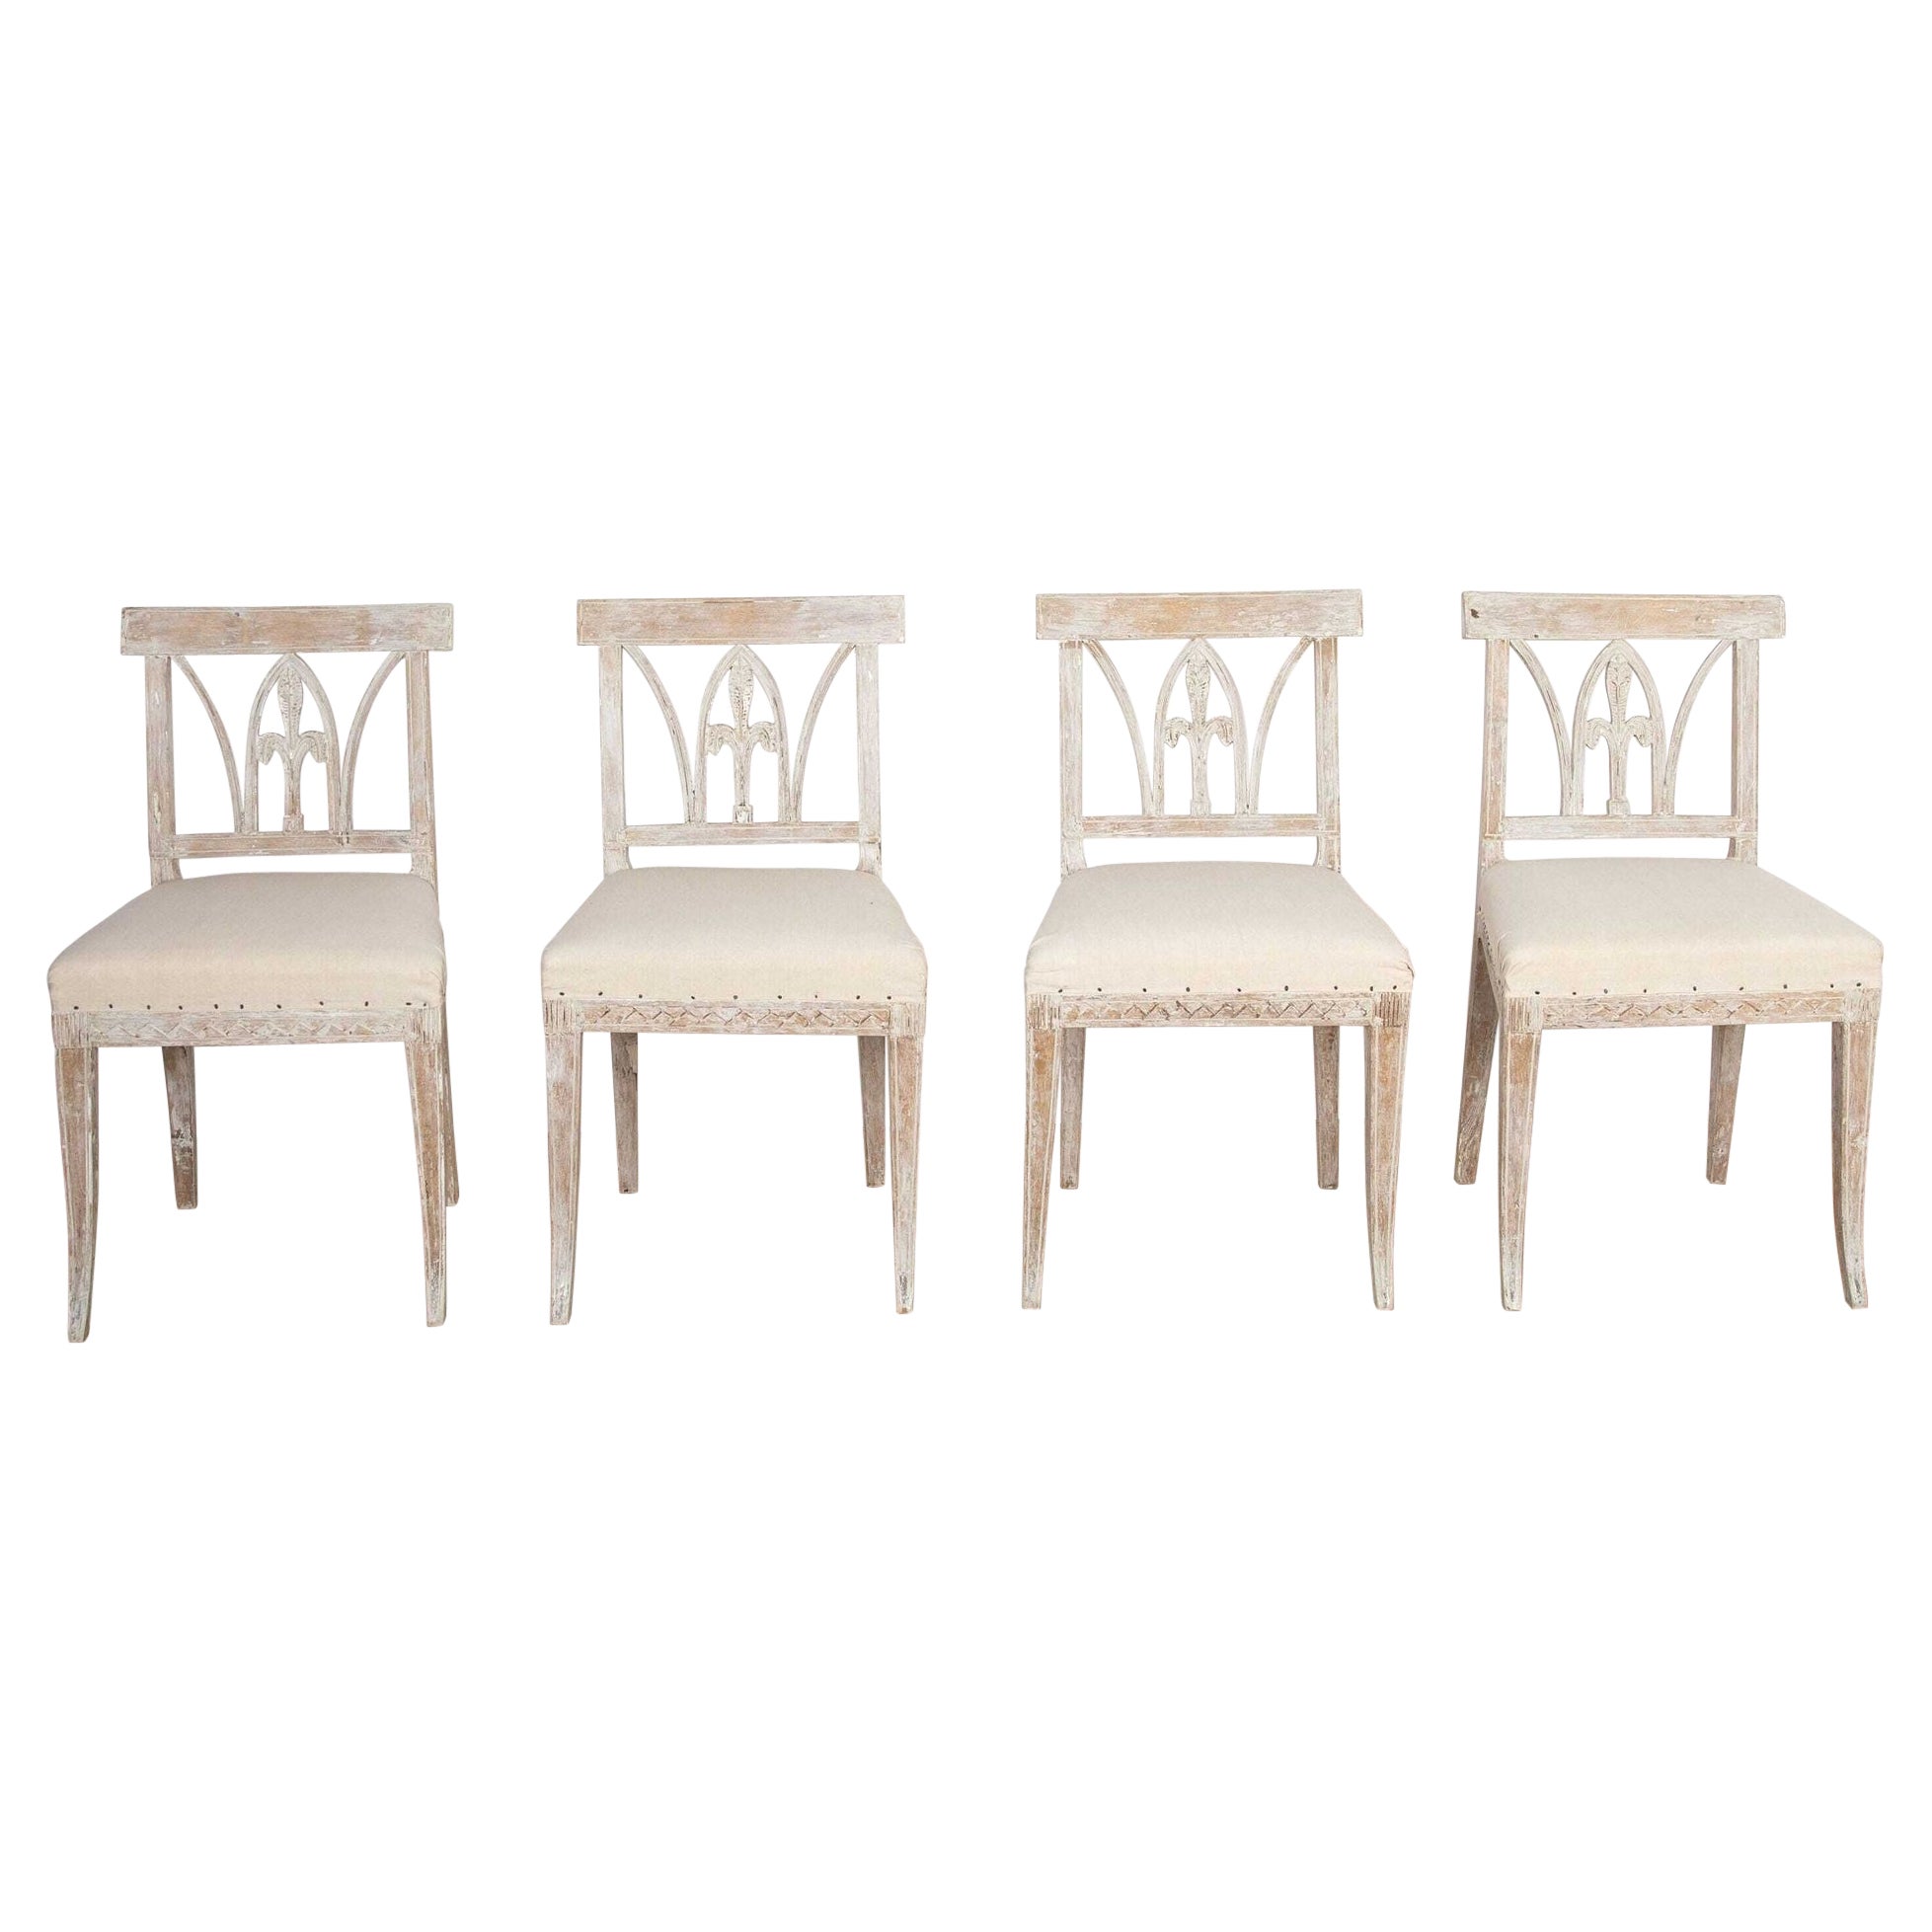 Set of Four 18th Century Gustavian Dining Chairs